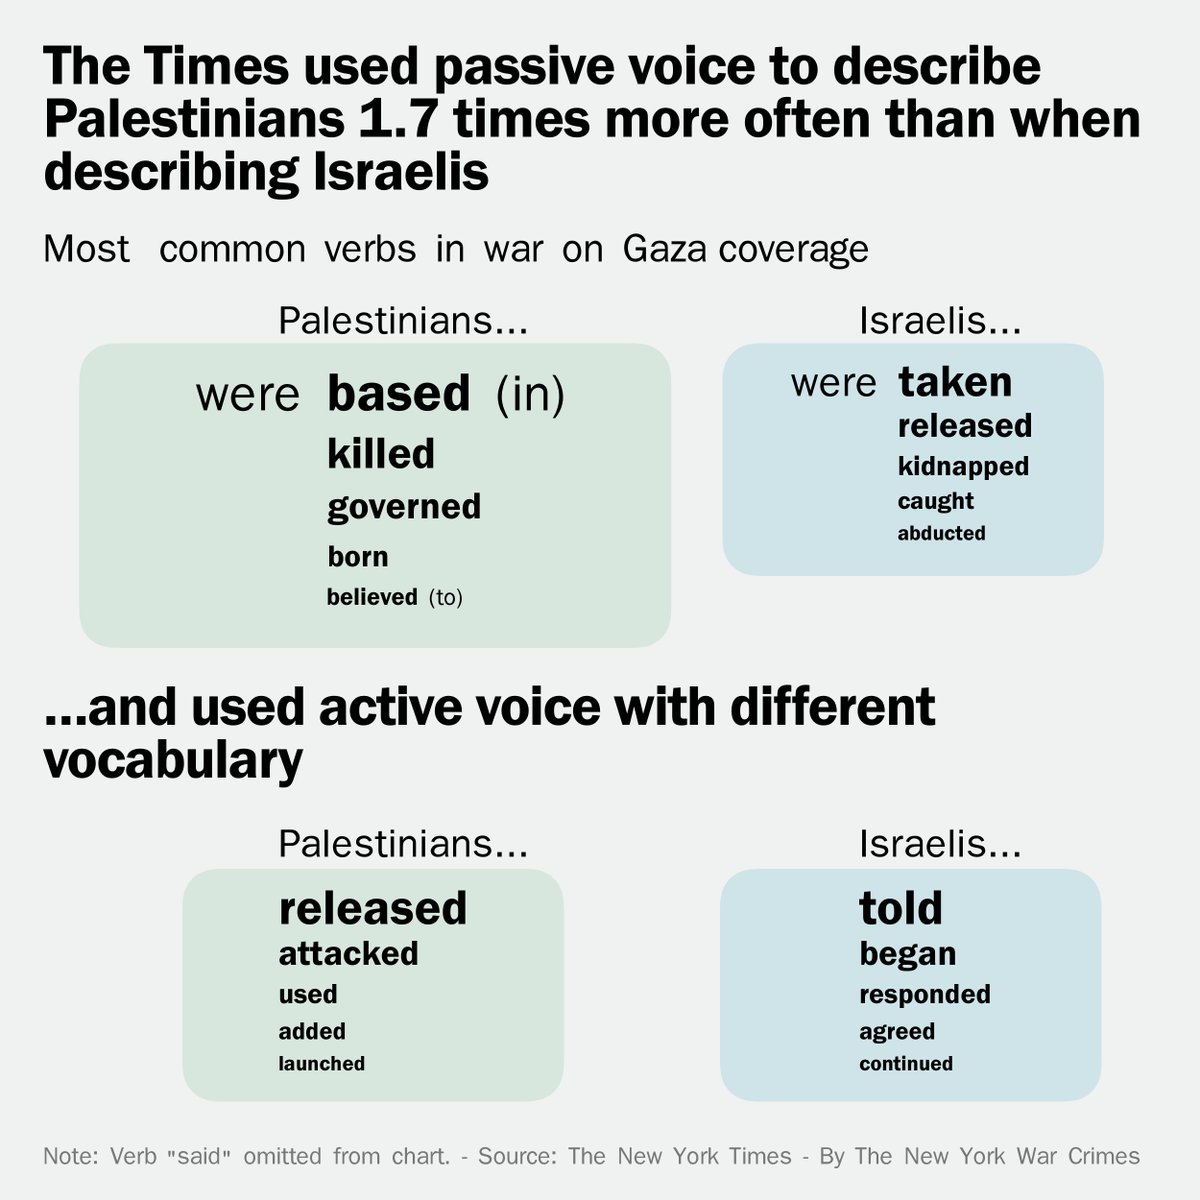 Proud to have been part of the team that computationally analyzed the New York Times' biased coverage of Israel and Palestine. This is part of a broader effort by Writers Against the War On Gaza @wawog_now, who released today a tour-de-force exposé of NYT: newyorkwarcrimes.com